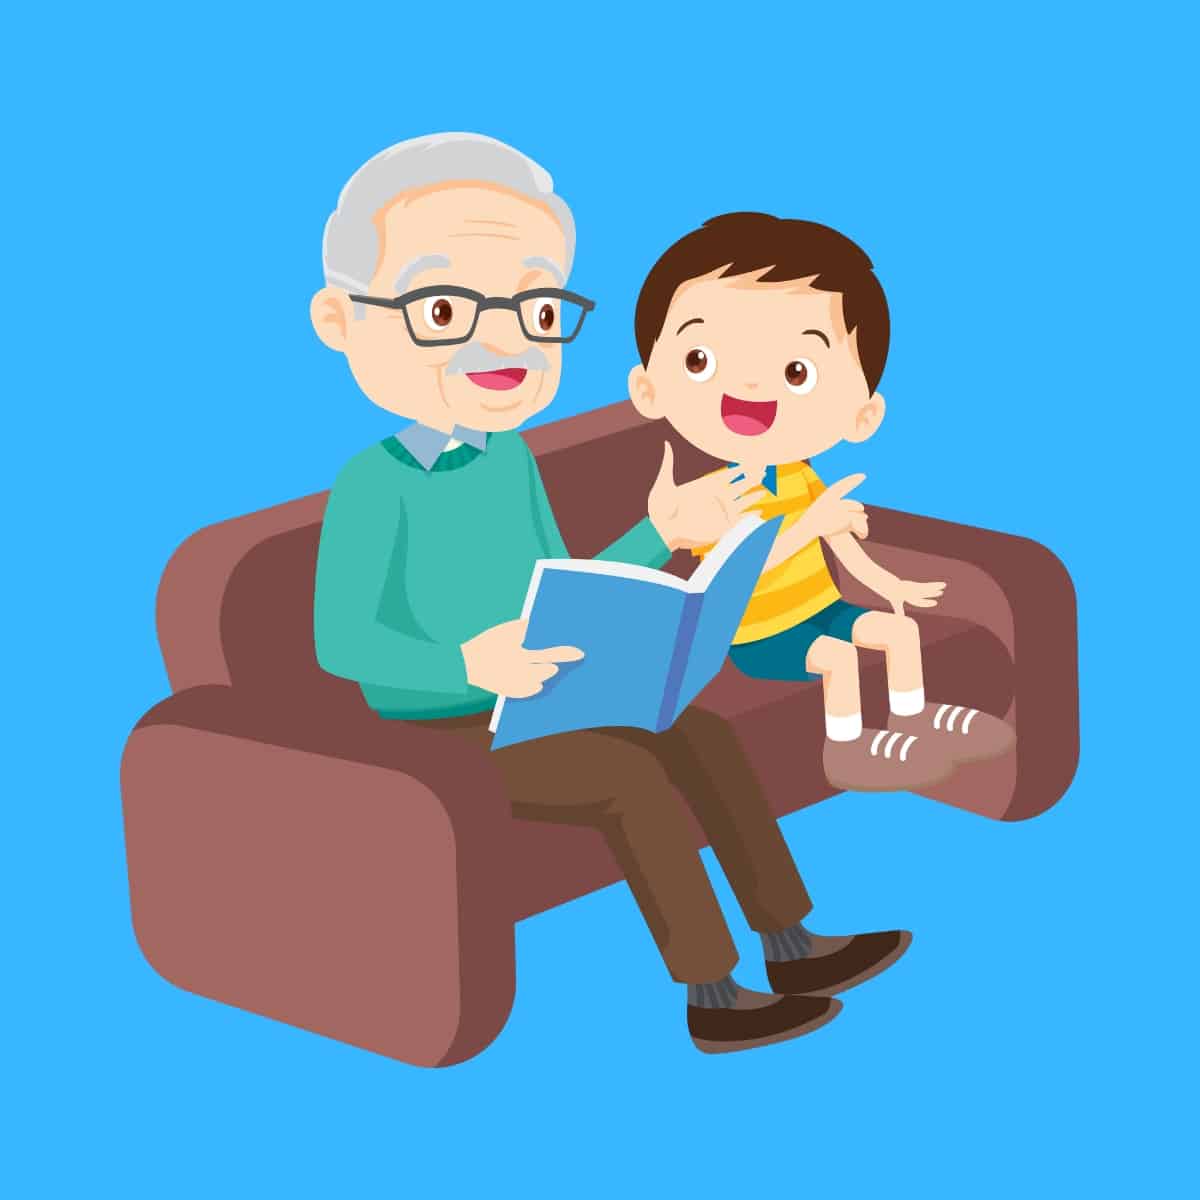 Cartoon graphic of a grandpa reading a book to his grandson on a blue background.